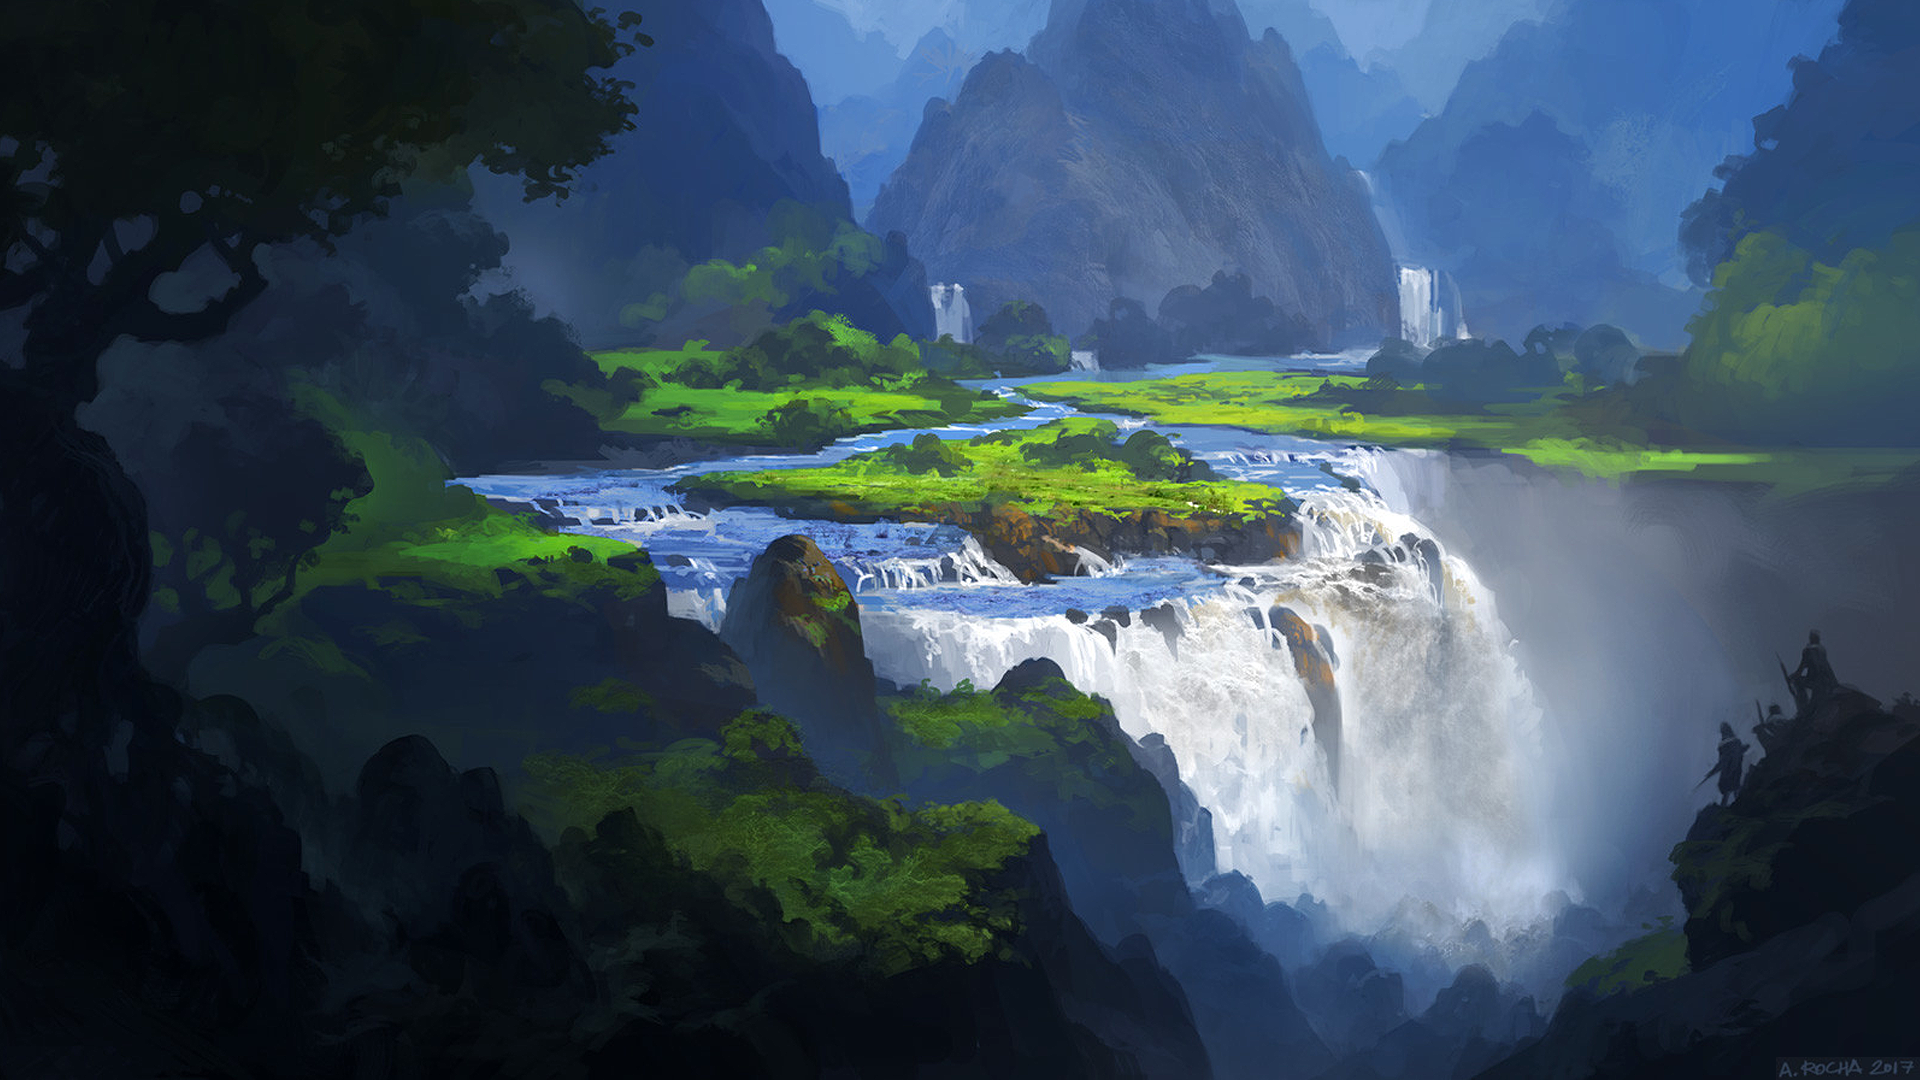 General 1920x1080 Andreas Rocha artwork digital art landscape waterfall forest mountains trees 2017 (Year) nature